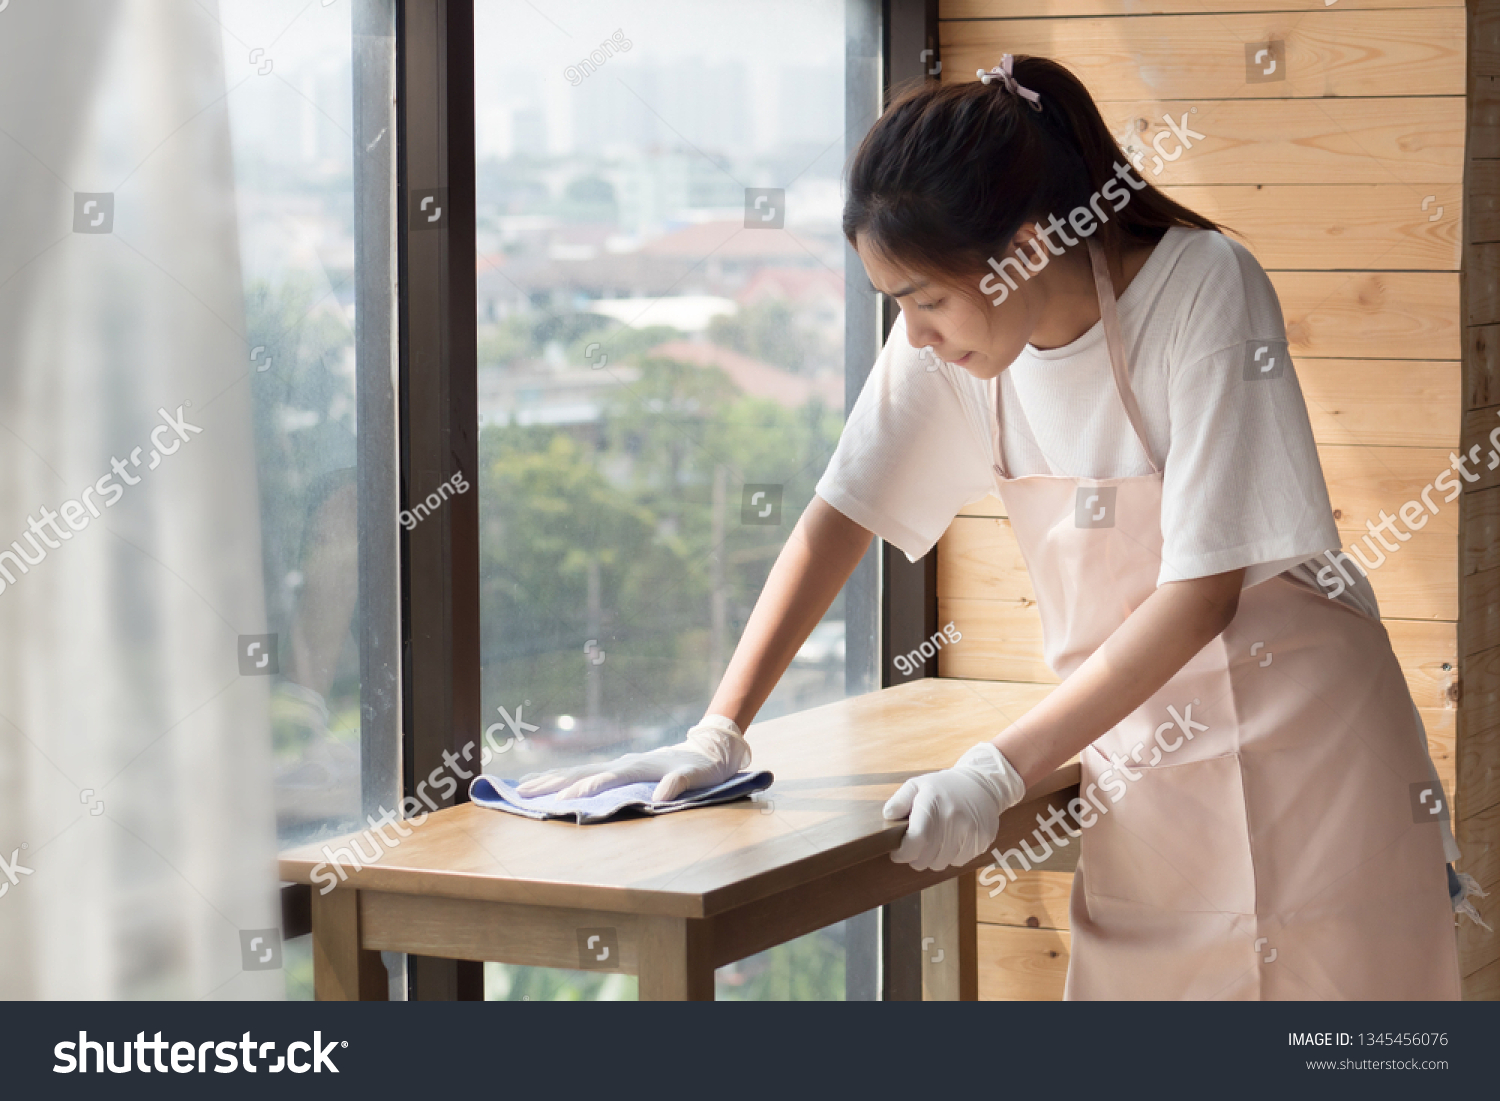 woman cleaner cleaning, disinfecting with disinfectant living room in apartment. portrait of asian woman cleaning staff doing housekeeping or domestic helper job. young adult asian woman model #1345456076